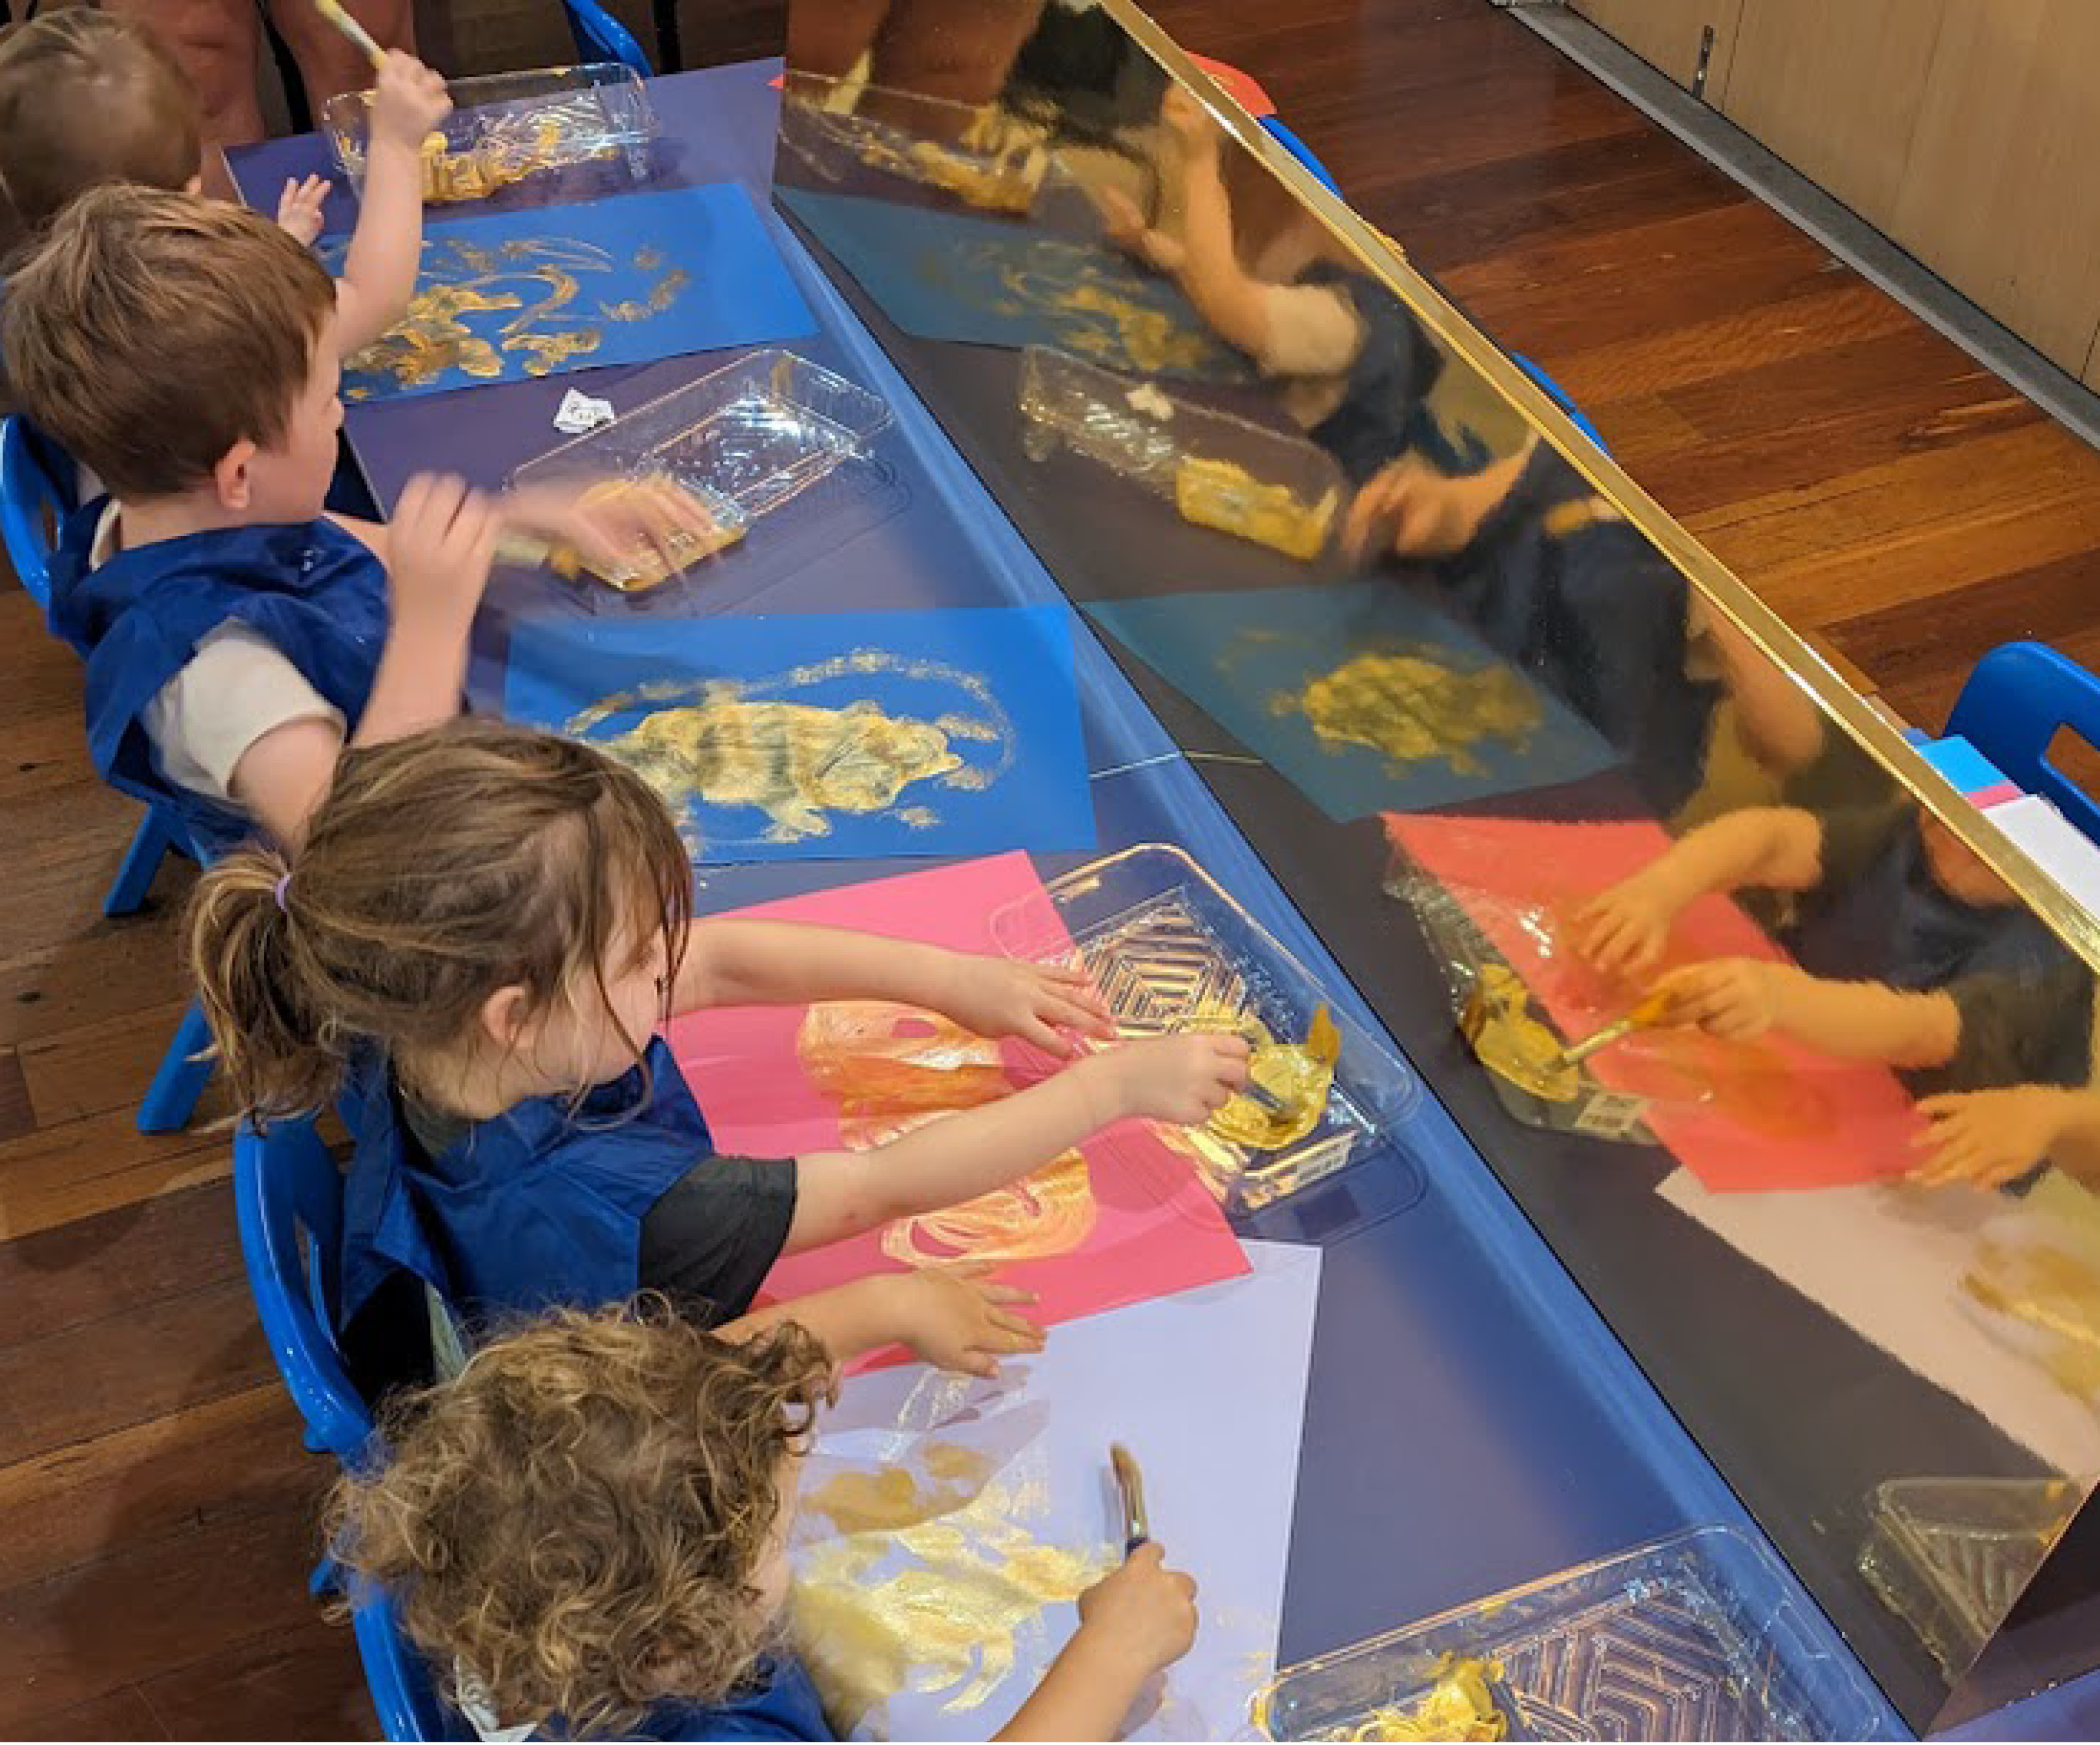 Join us at Hazelhurst in Gymea to experience the gallery’s exhibitions like never before, with stories, songs and art-making. Book your free ticket now.